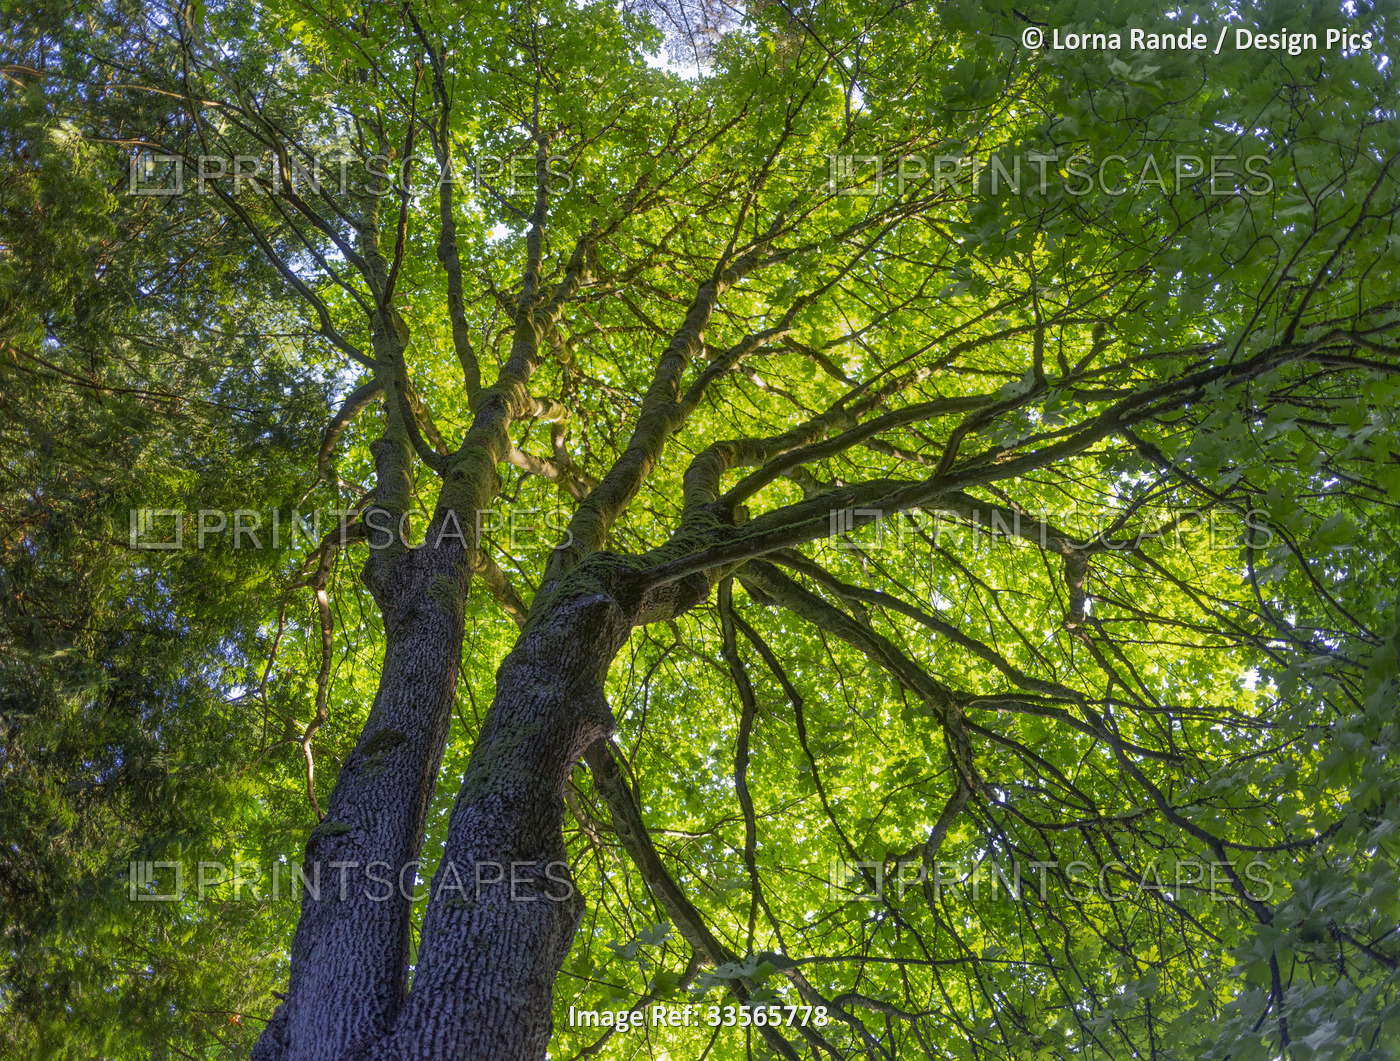 View of the lush green foliage in a treetop backlit by sunlight, Belcarra ...